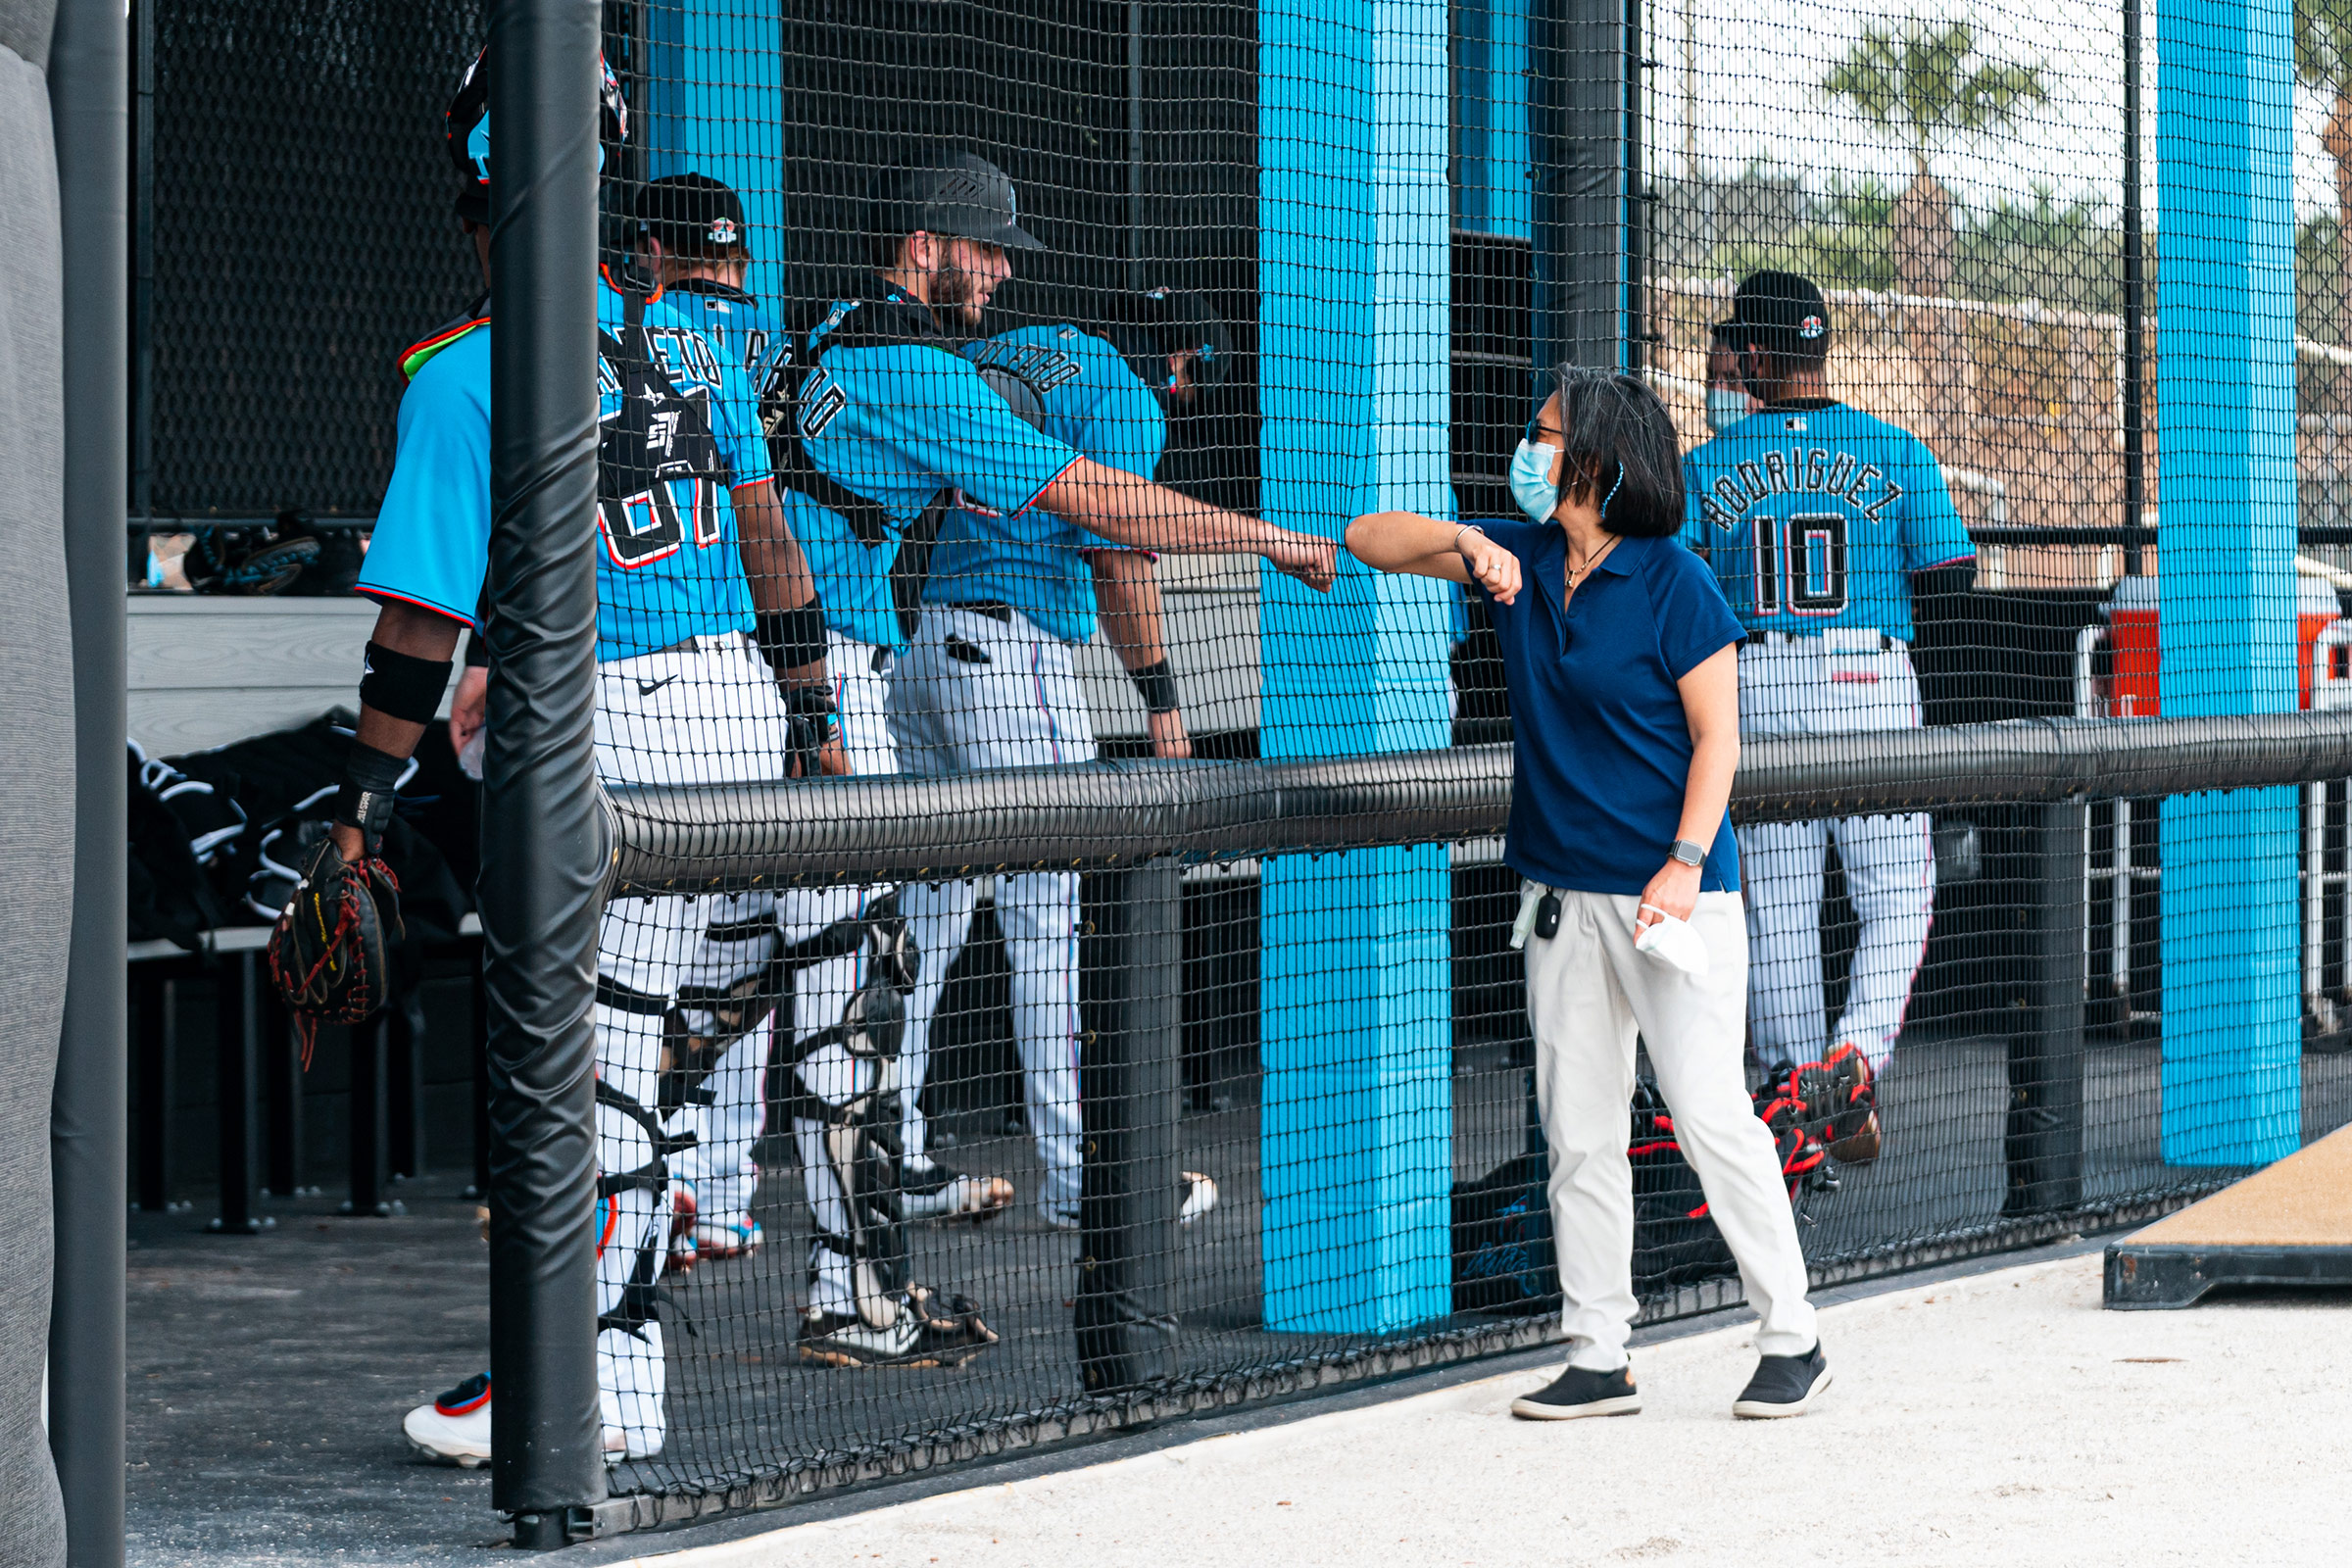 Miami Marlins Cameron Barstad and Kim Ng on the first day of Spring Training on February 18, 20201 at the Miami Marlins Spring Training facility at Roger Dean Chevrolet Stadium in Jupiter, Florida.